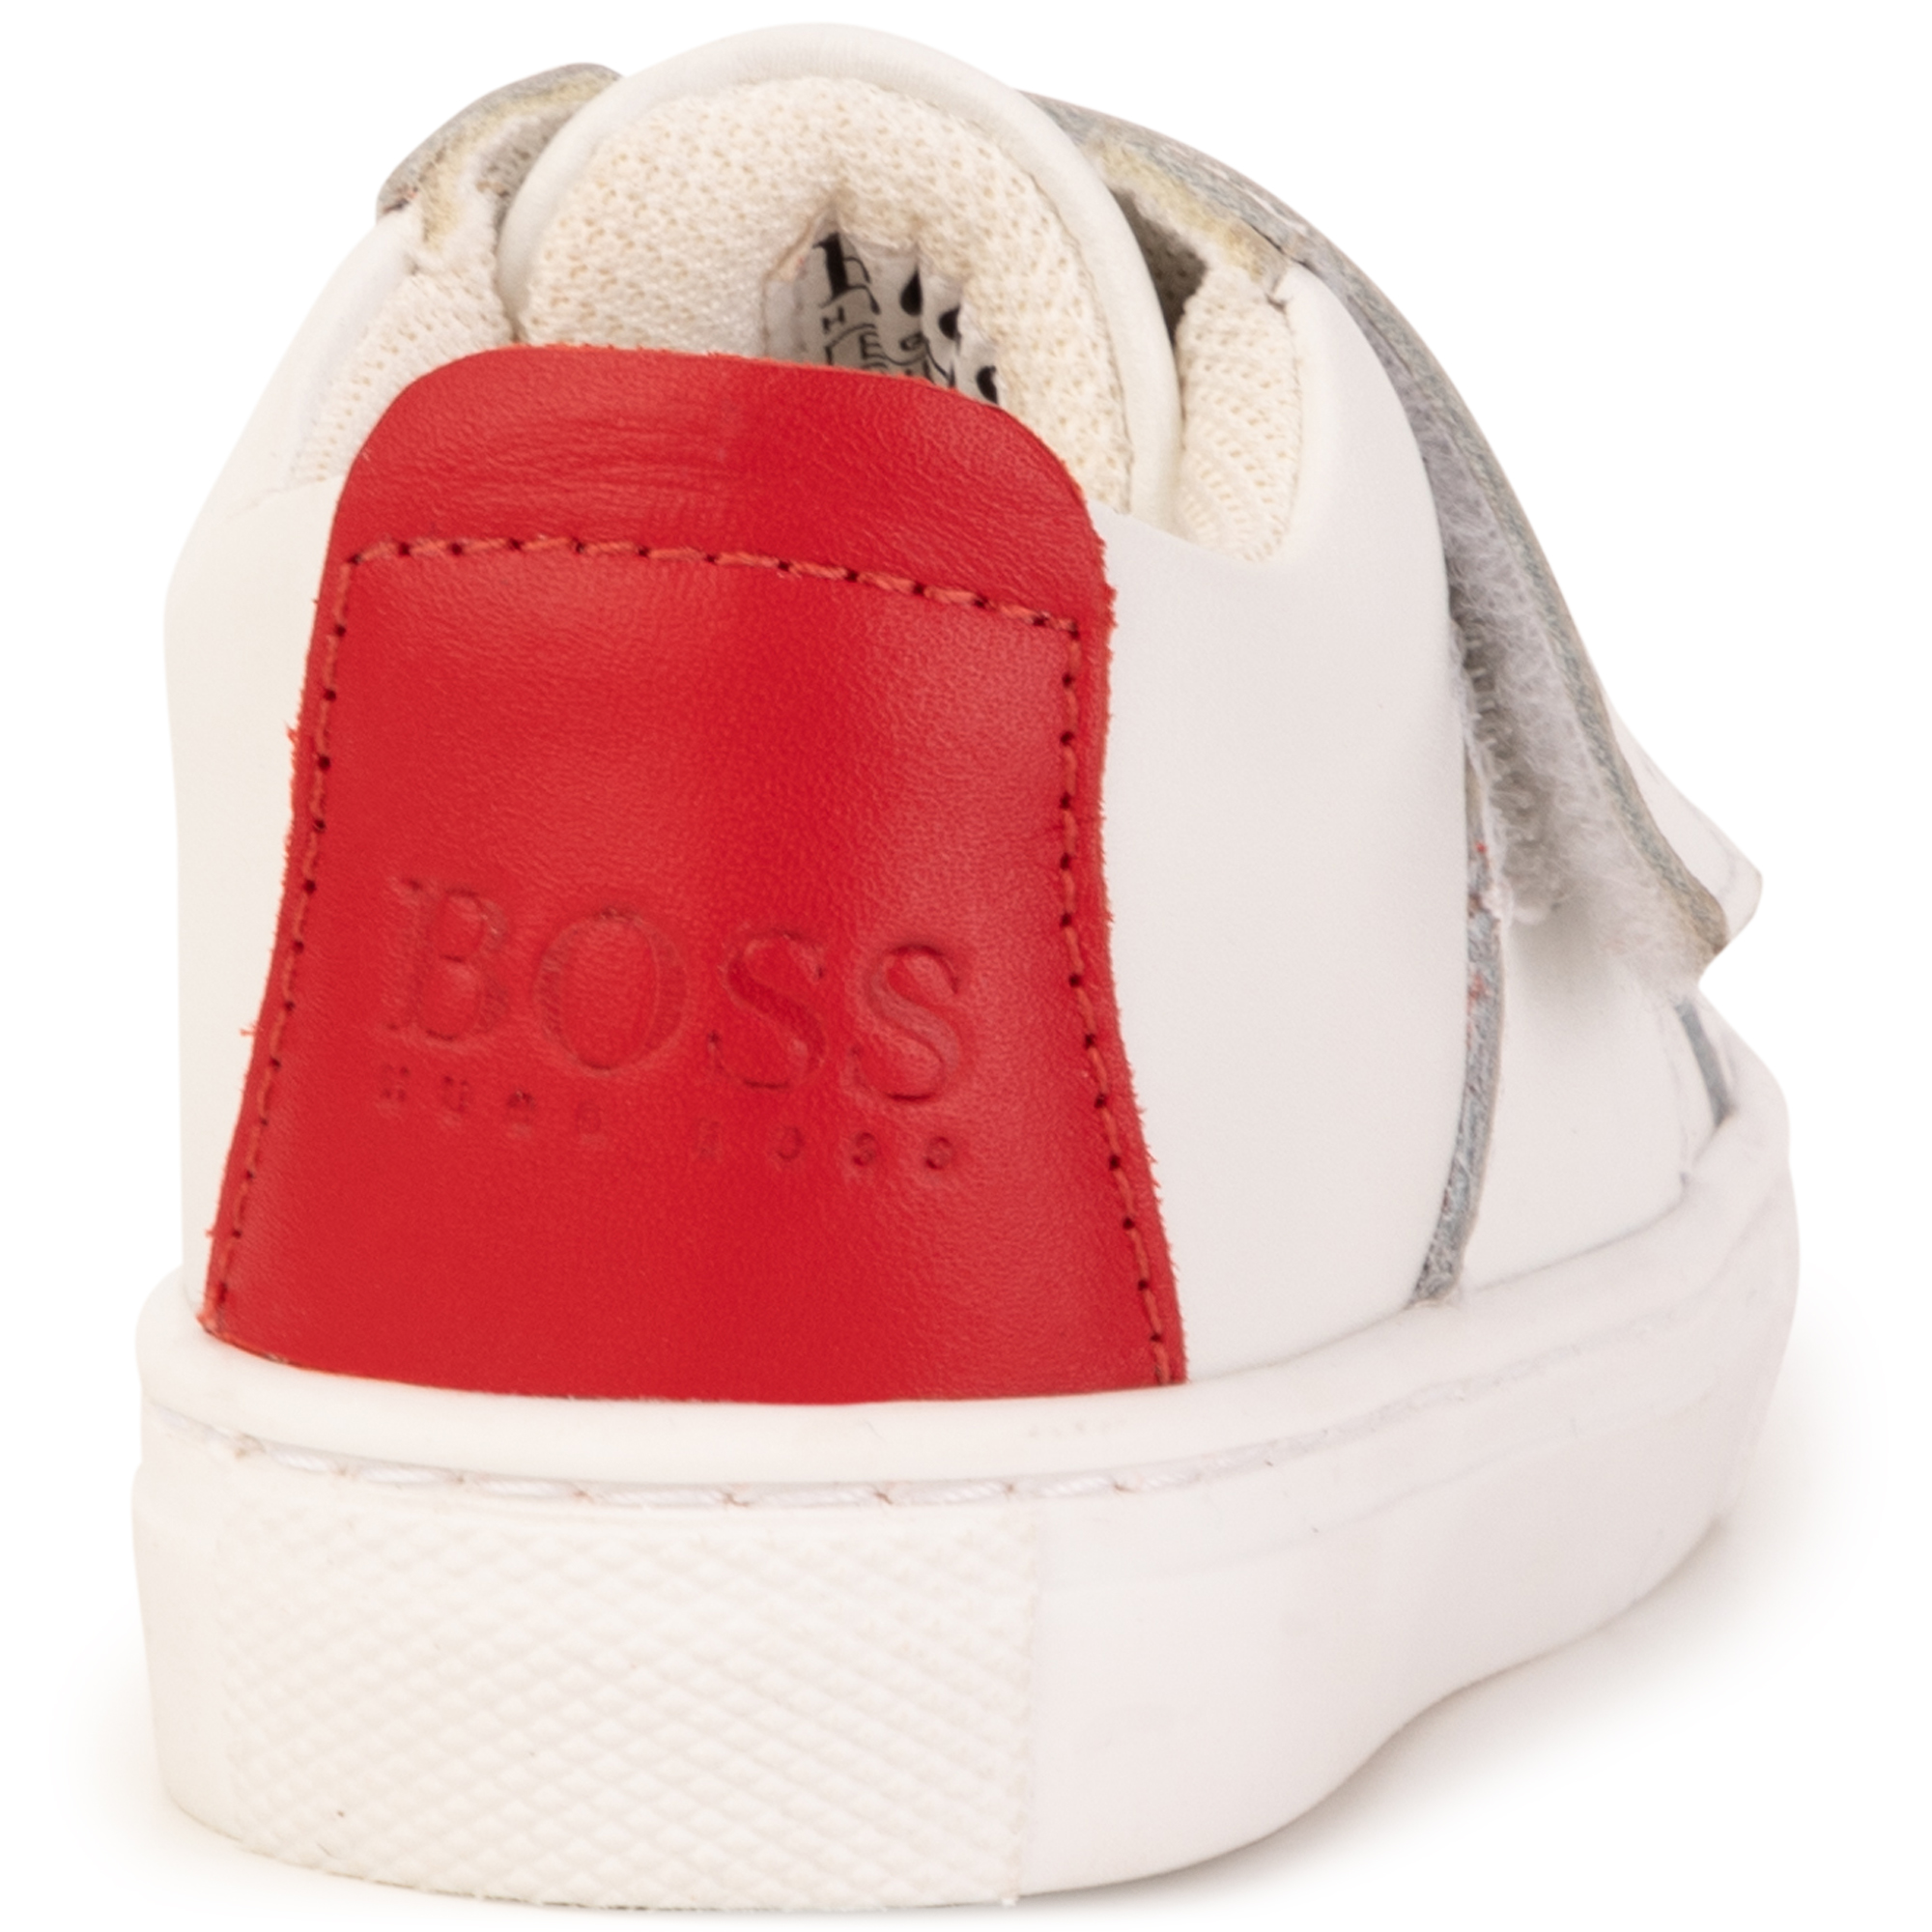 TRAINERS BOSS for BOY